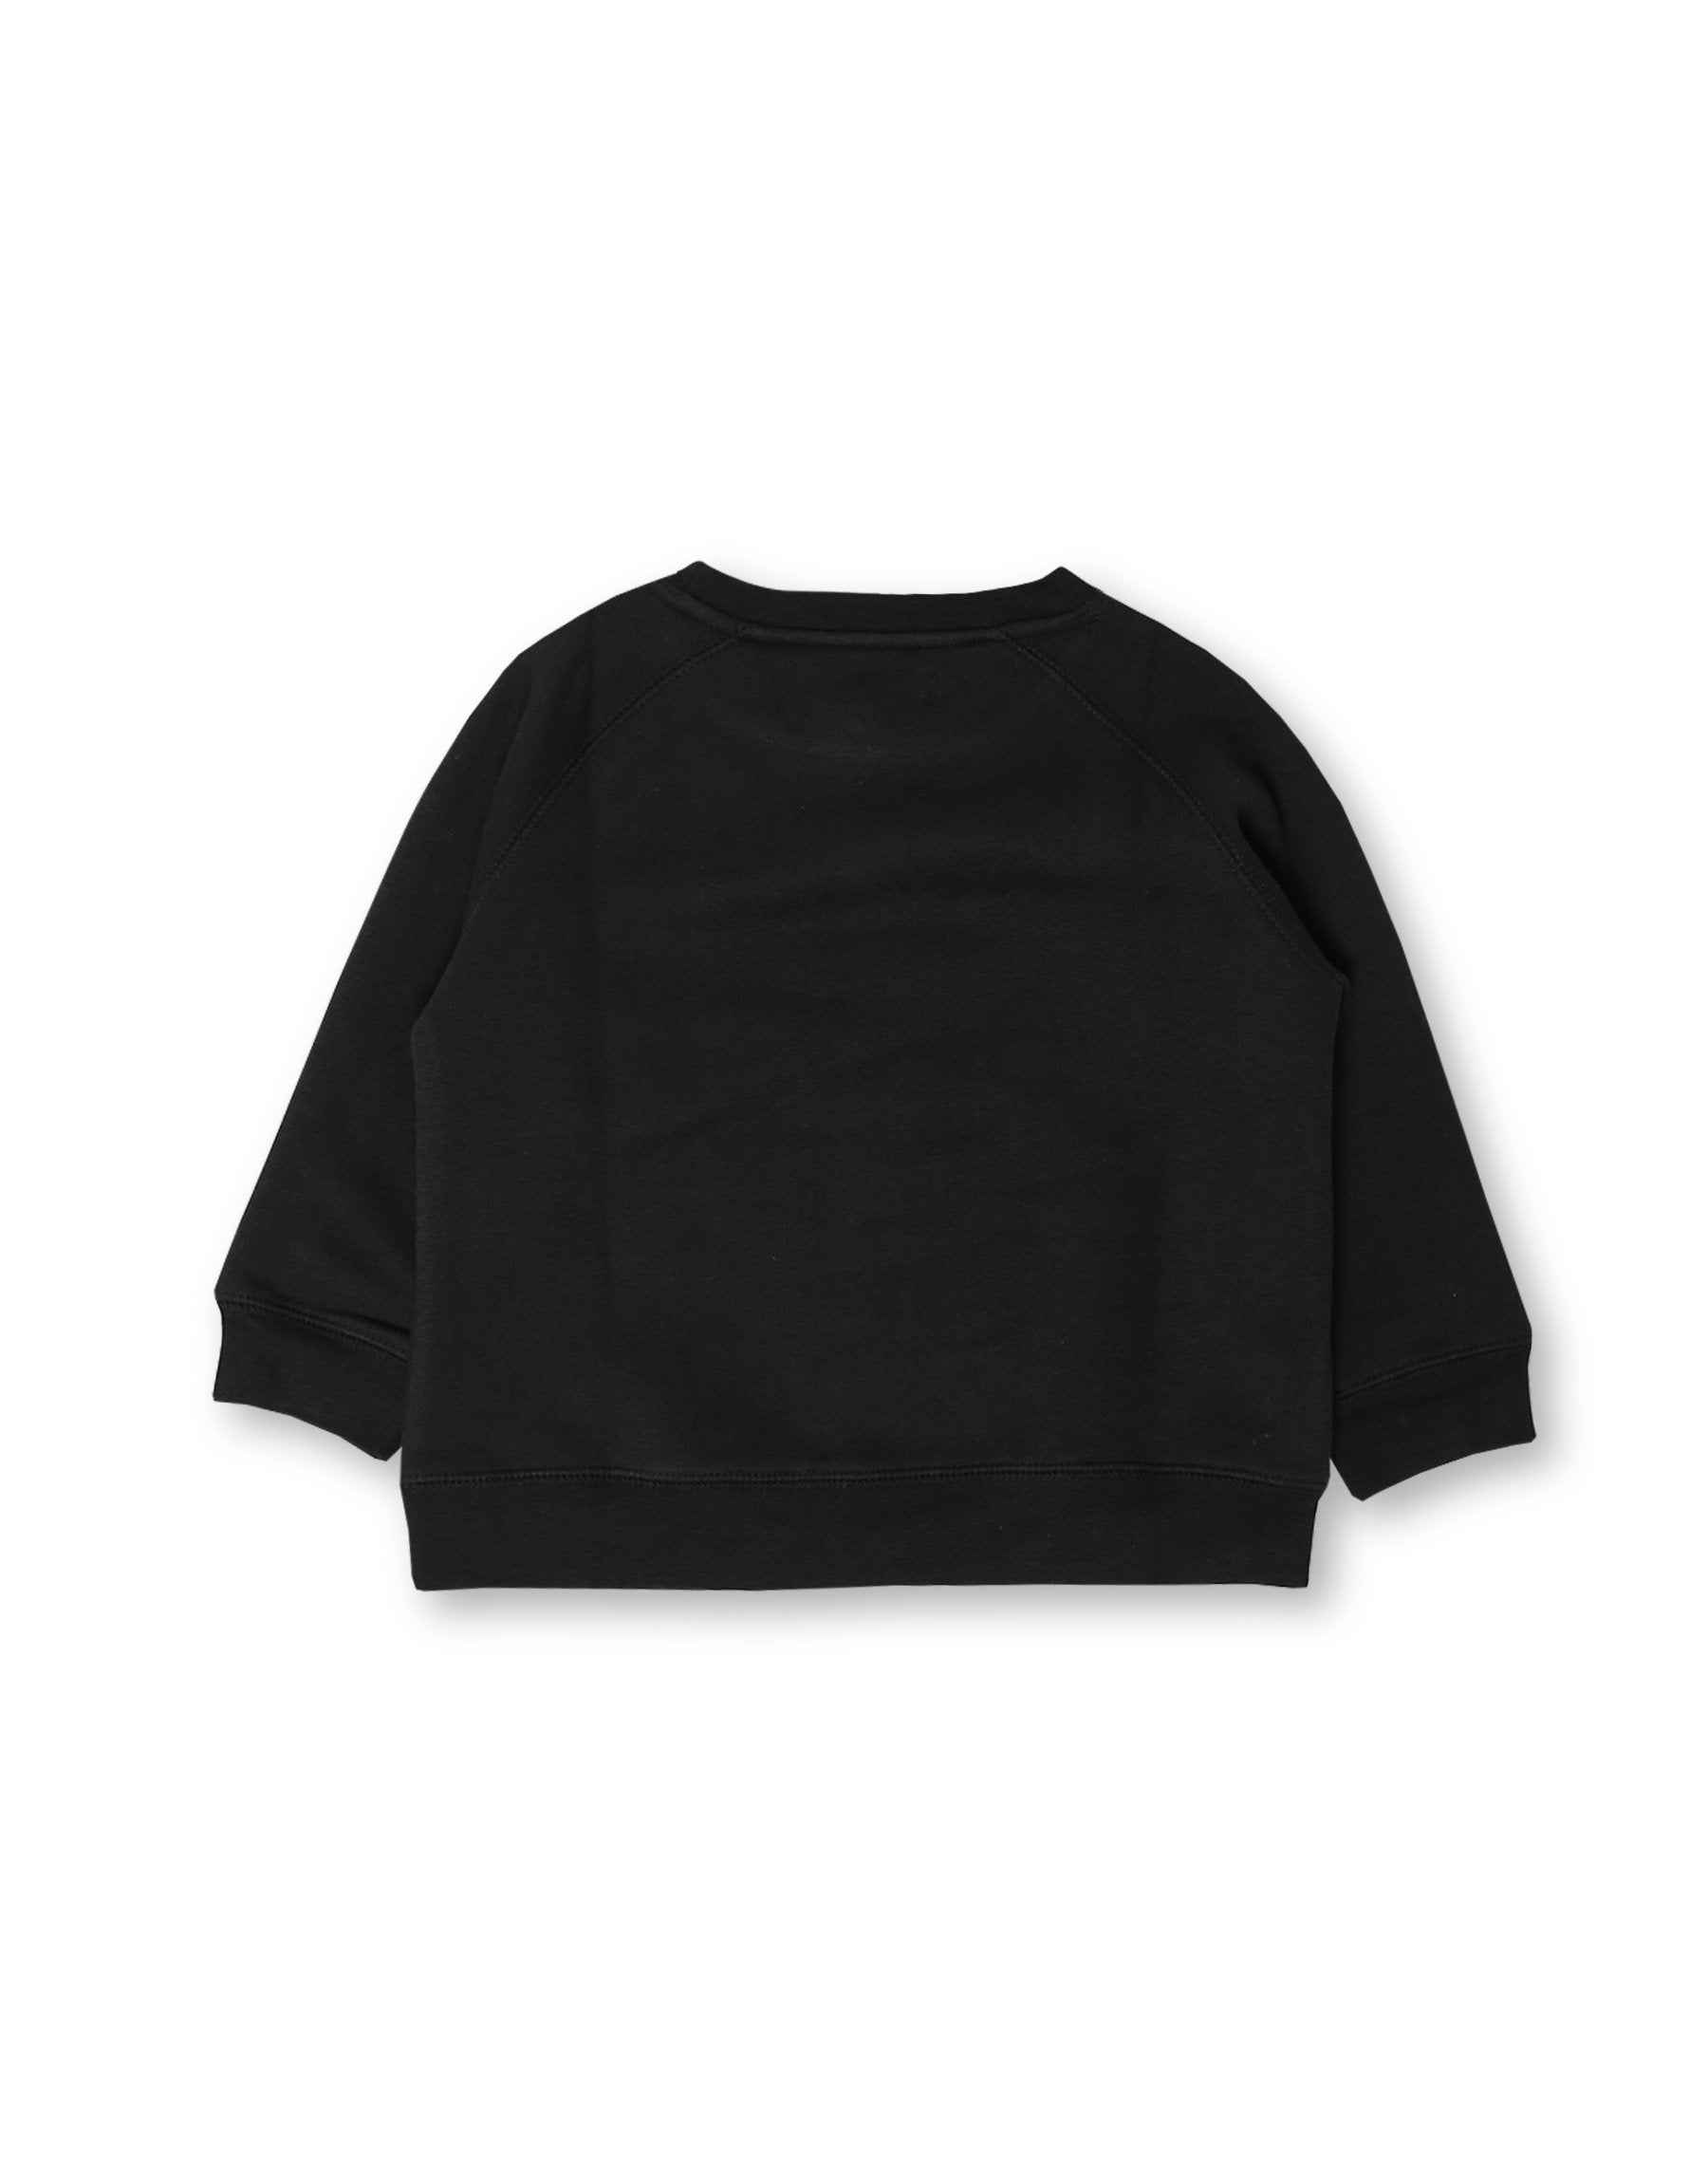 The "SLEIGH ALL DAY " Little Babes Classic Crew Neck Sweatshirt | Black